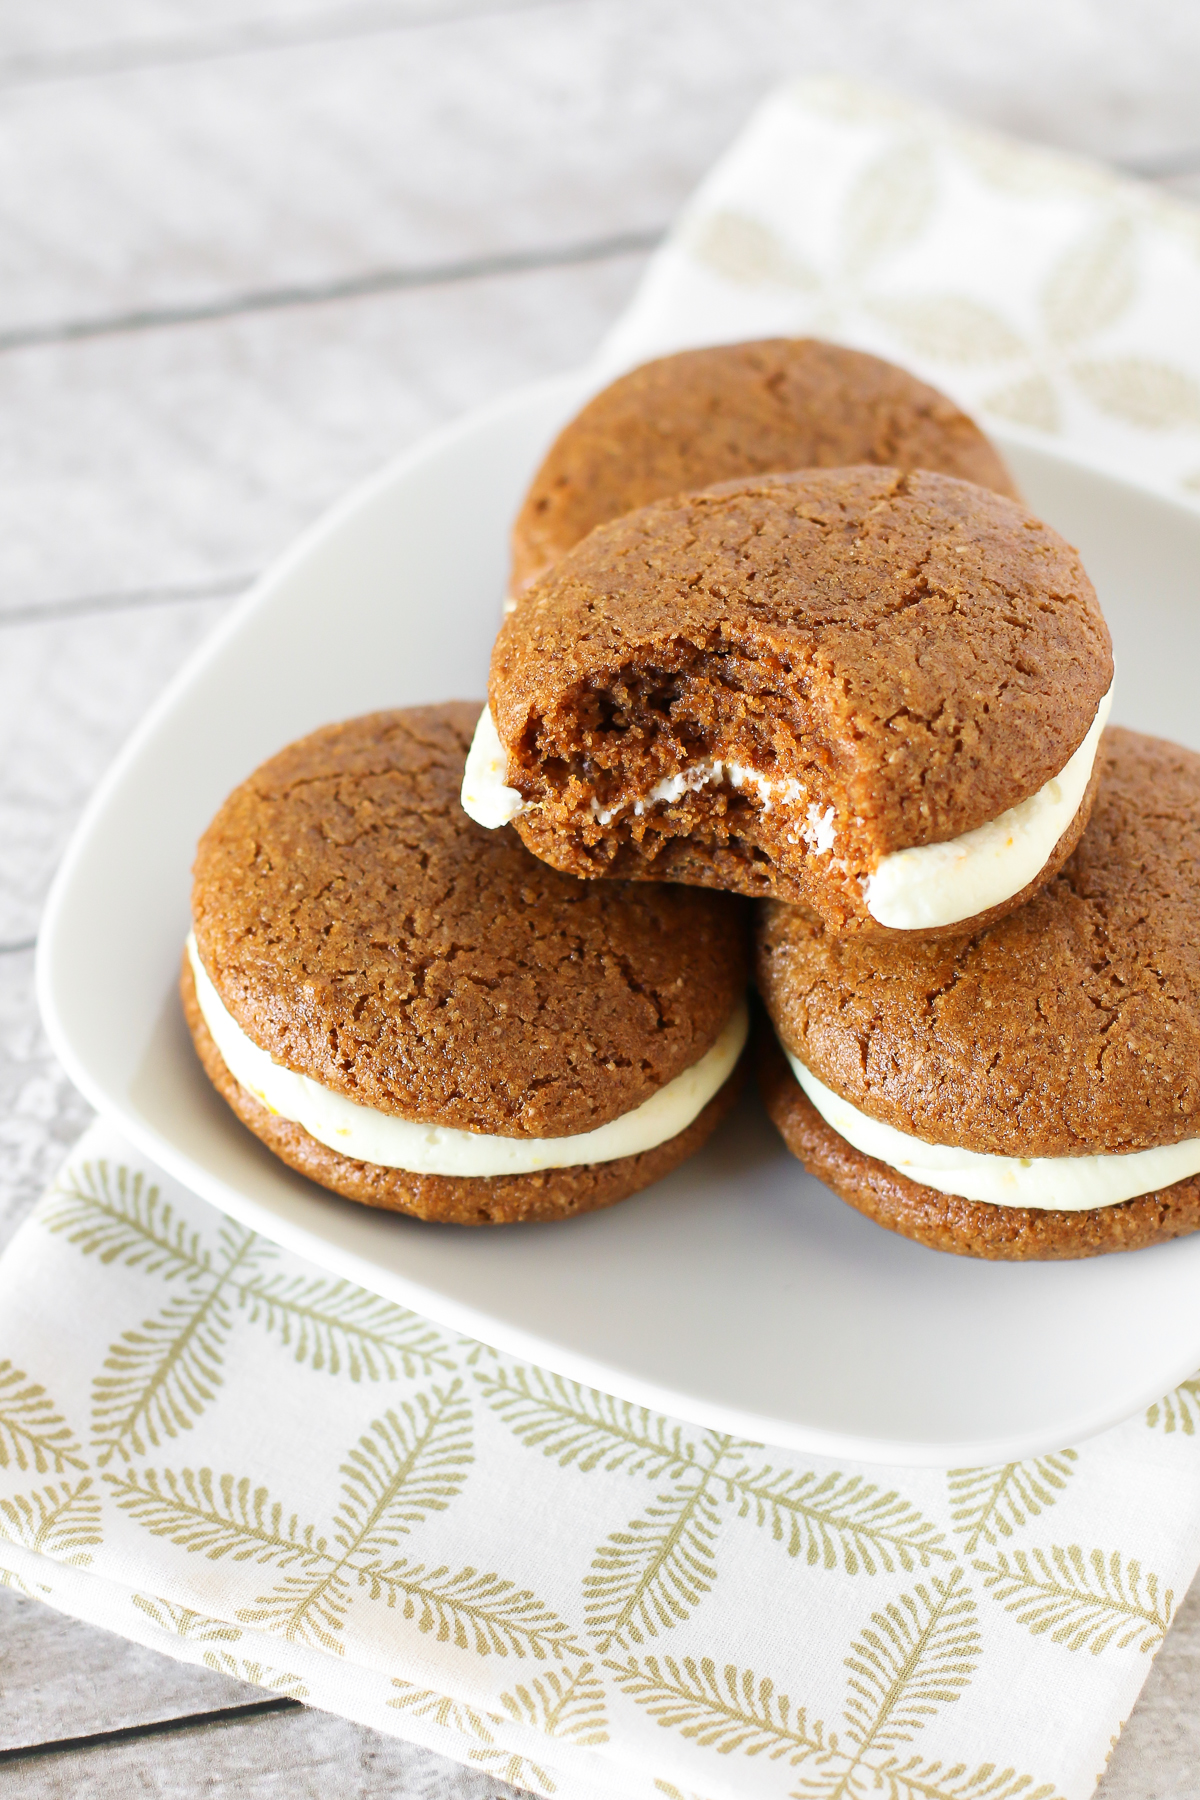 Gluten Free Vegan Gingerbread Whoopie Pies. Soft cake-like gingerbread cookies with a dairy free orange buttercream filling. Heavenly!